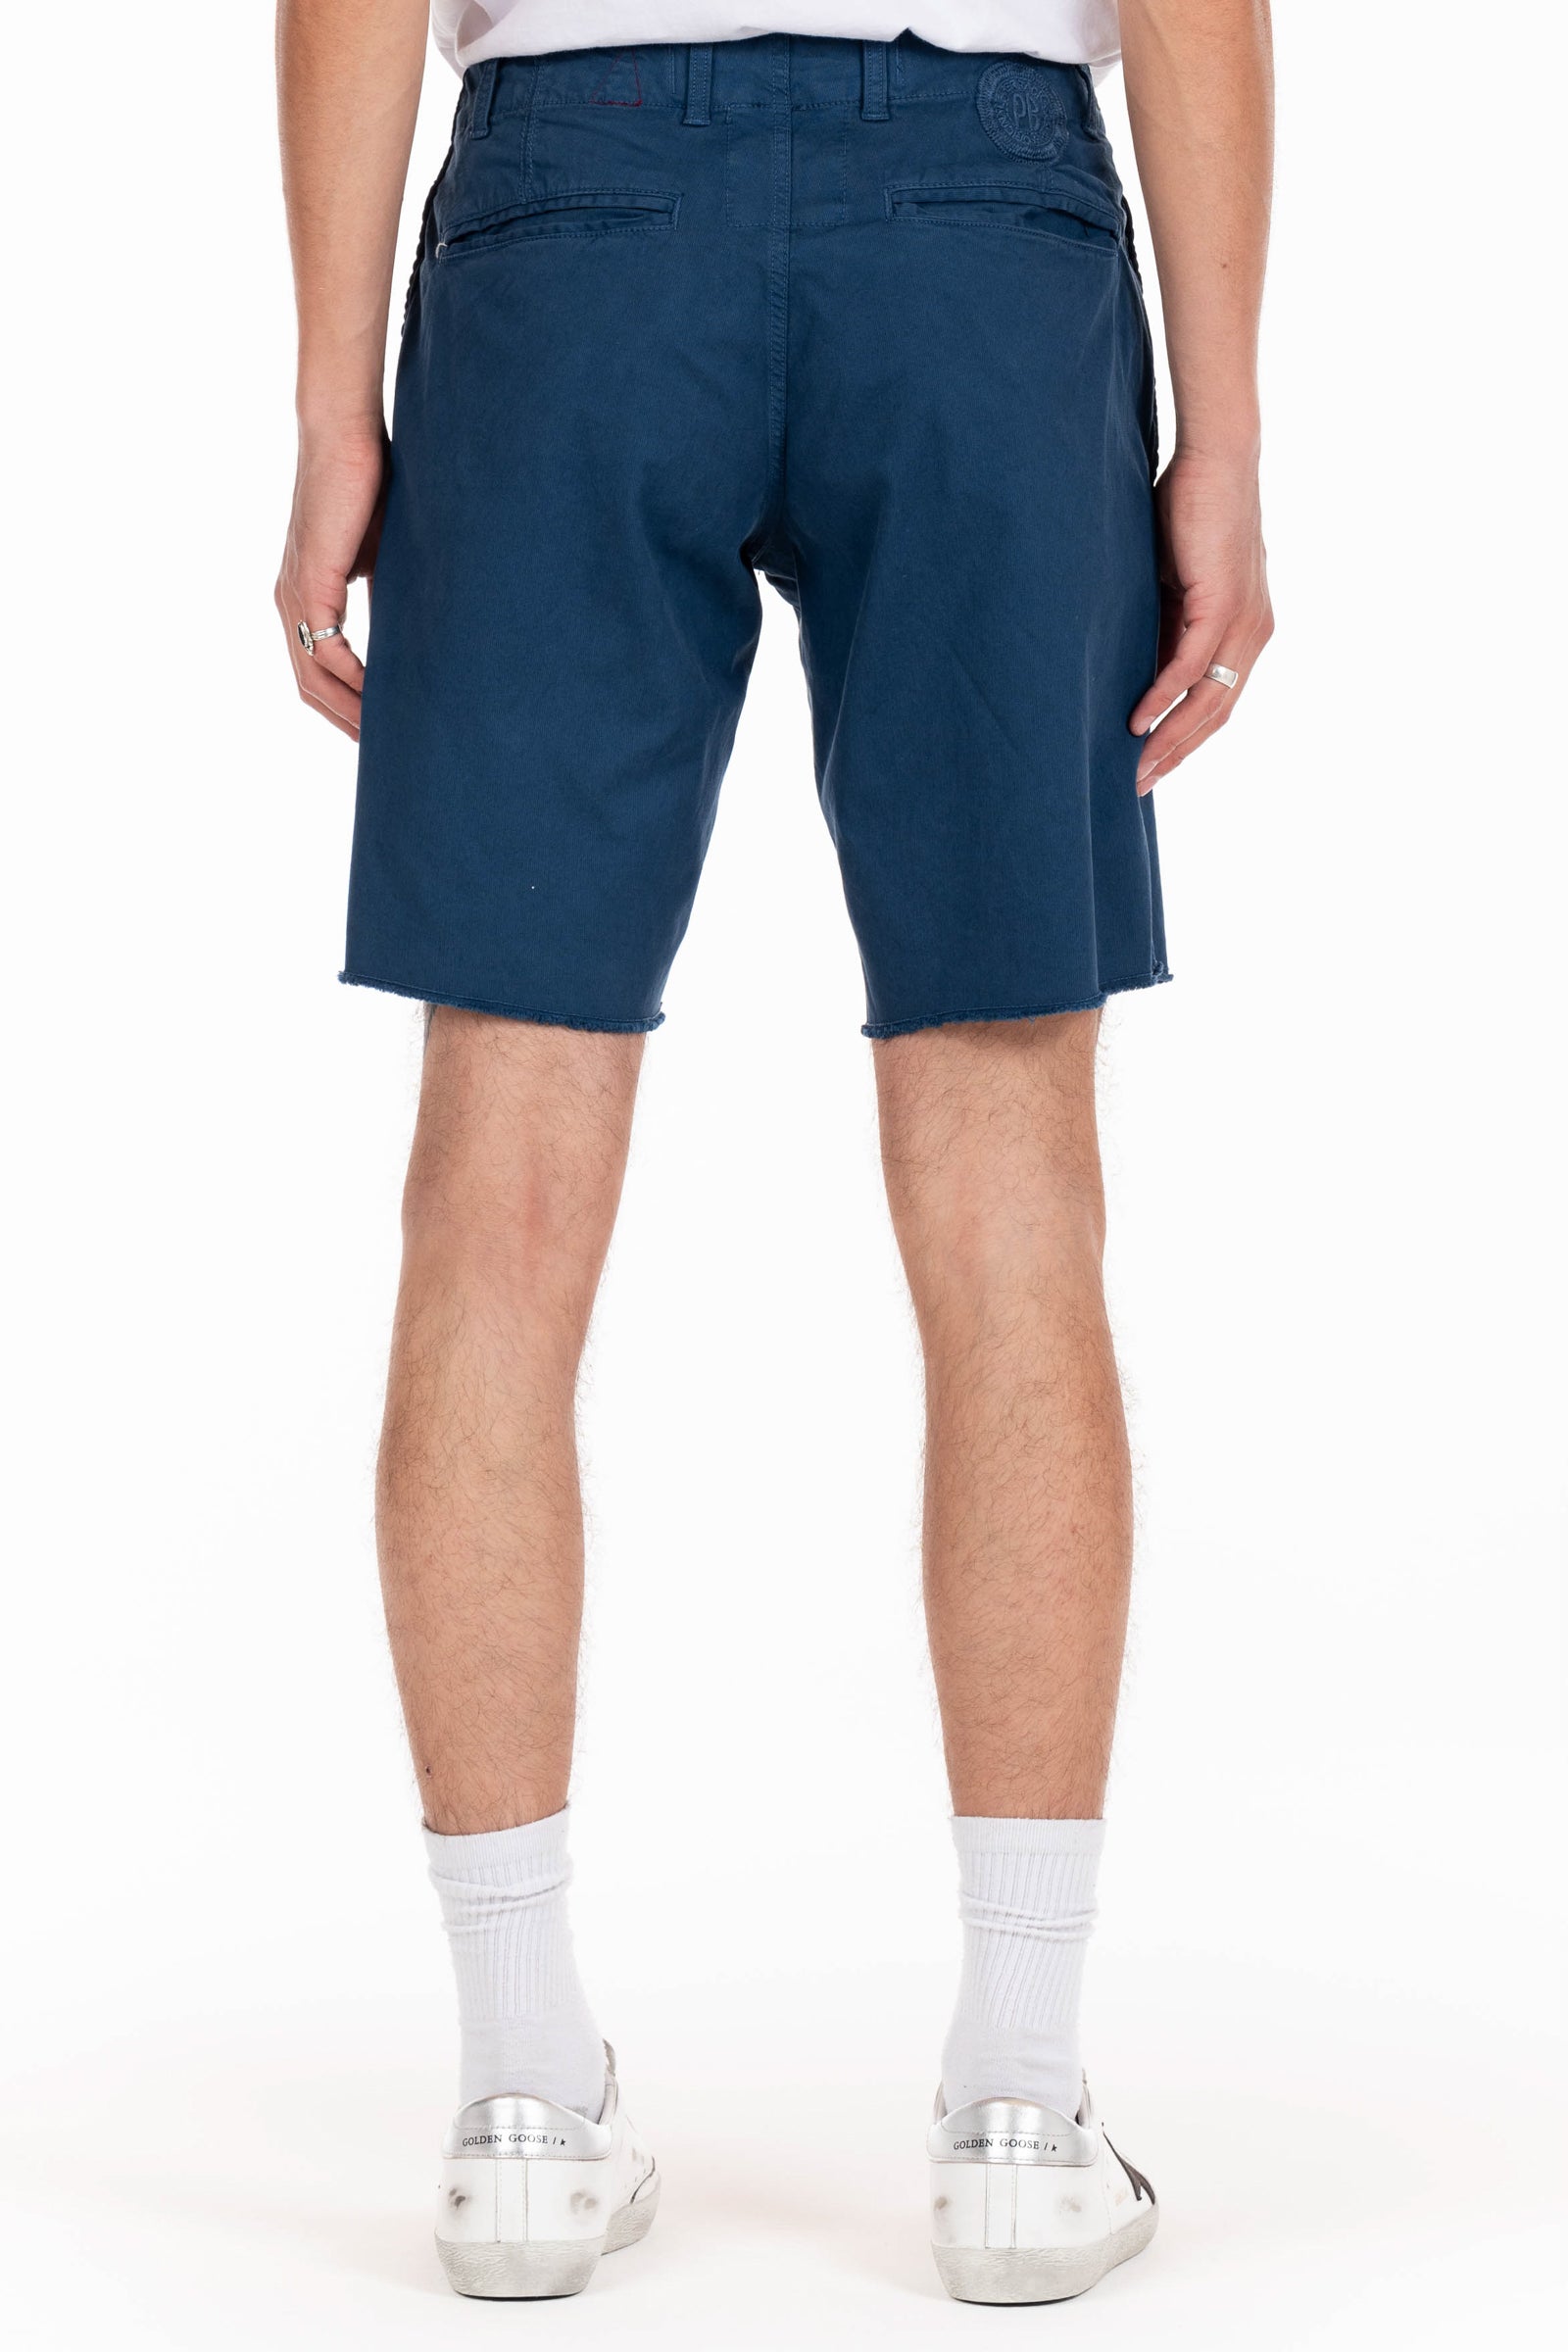 Original Paperbacks Rockland Chino Short in Ocean on Model Cropped Back View